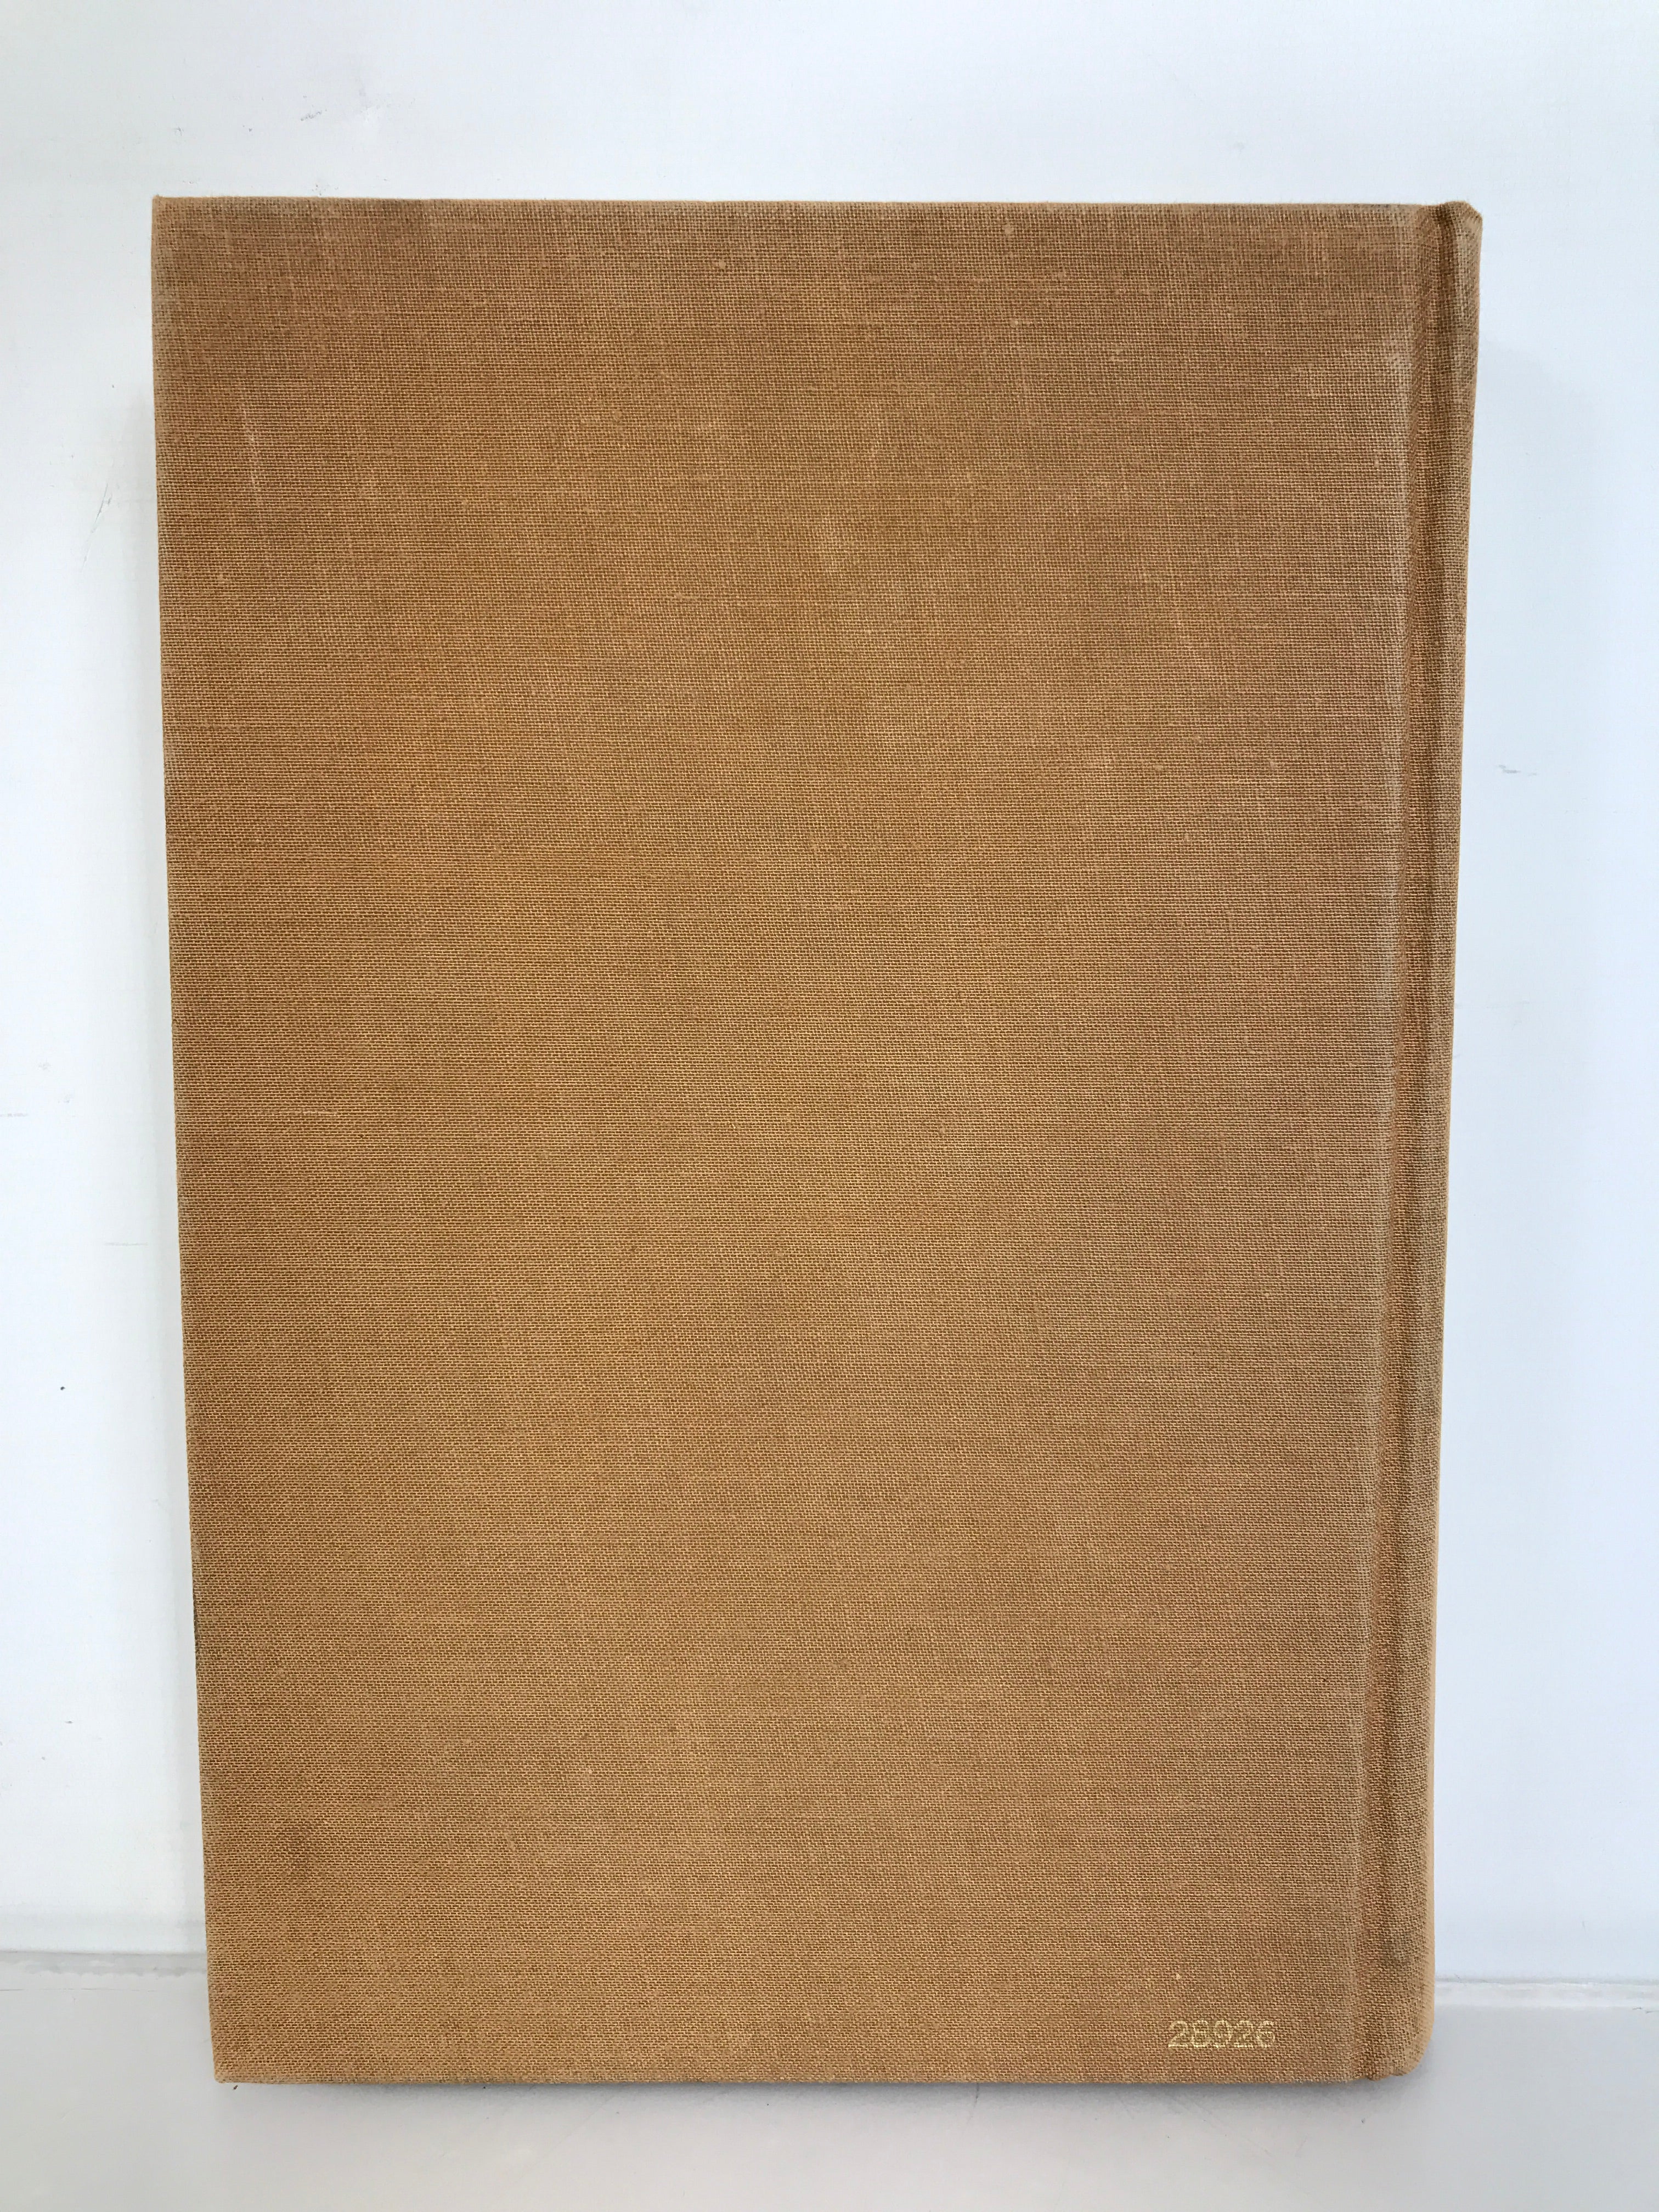 Animal Behaviour A Synthesis of Ethology and Comparative Psychology Robert A. Hinde 1966 HC